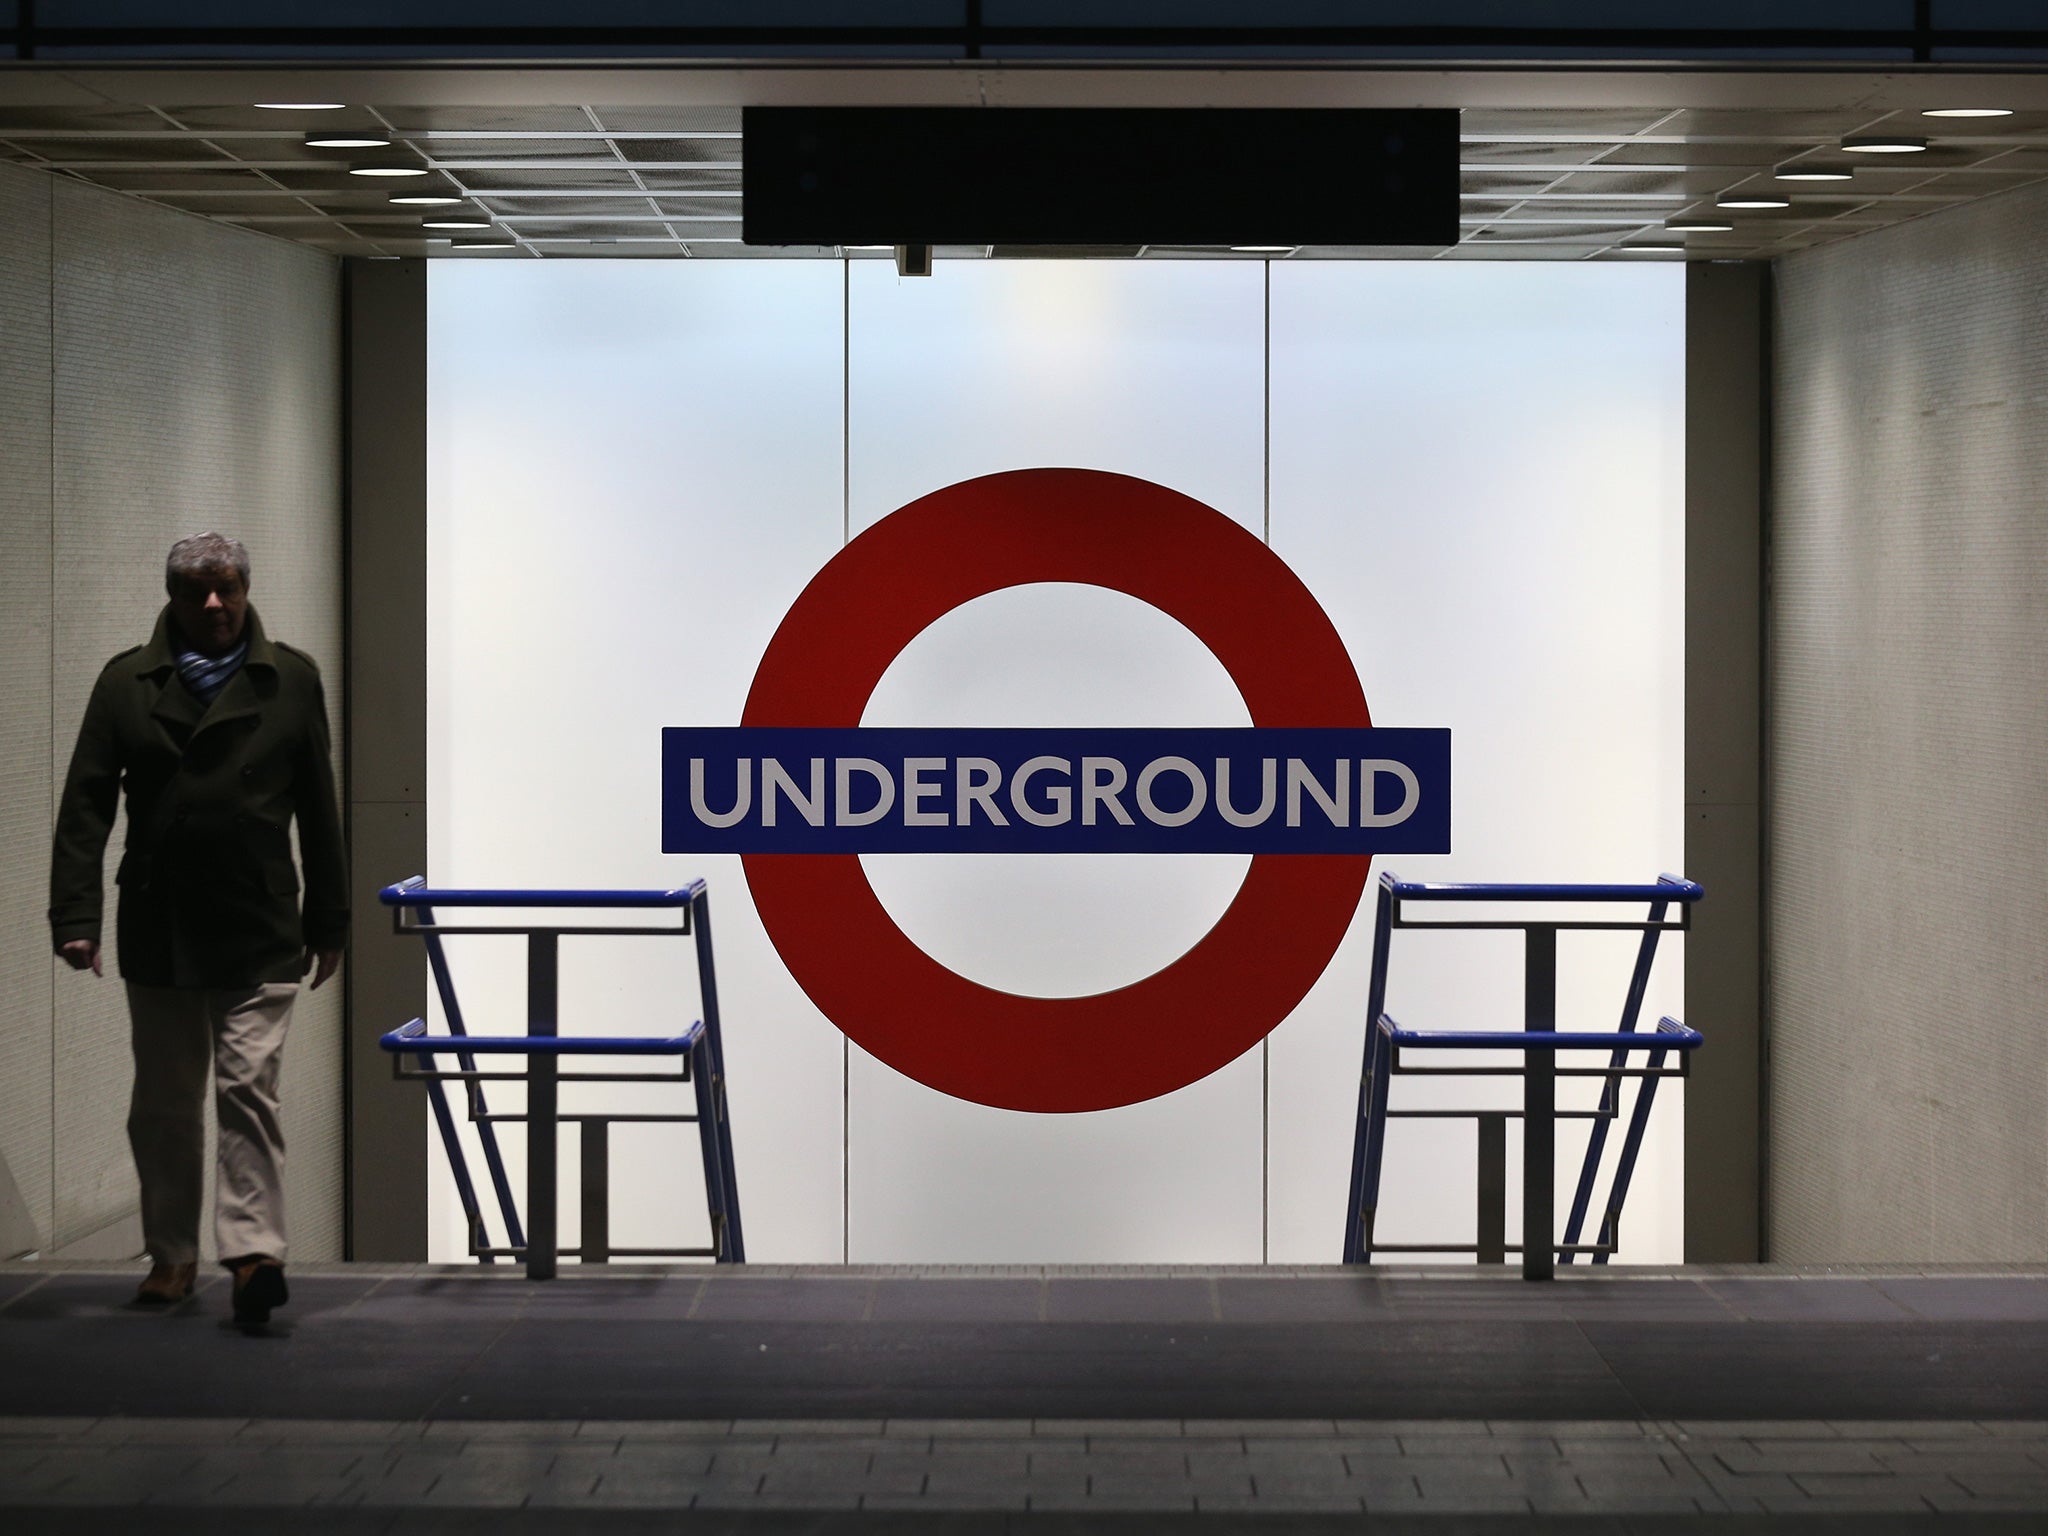 In 2013/2014, there were 2,753 recorded assaults on tube staff